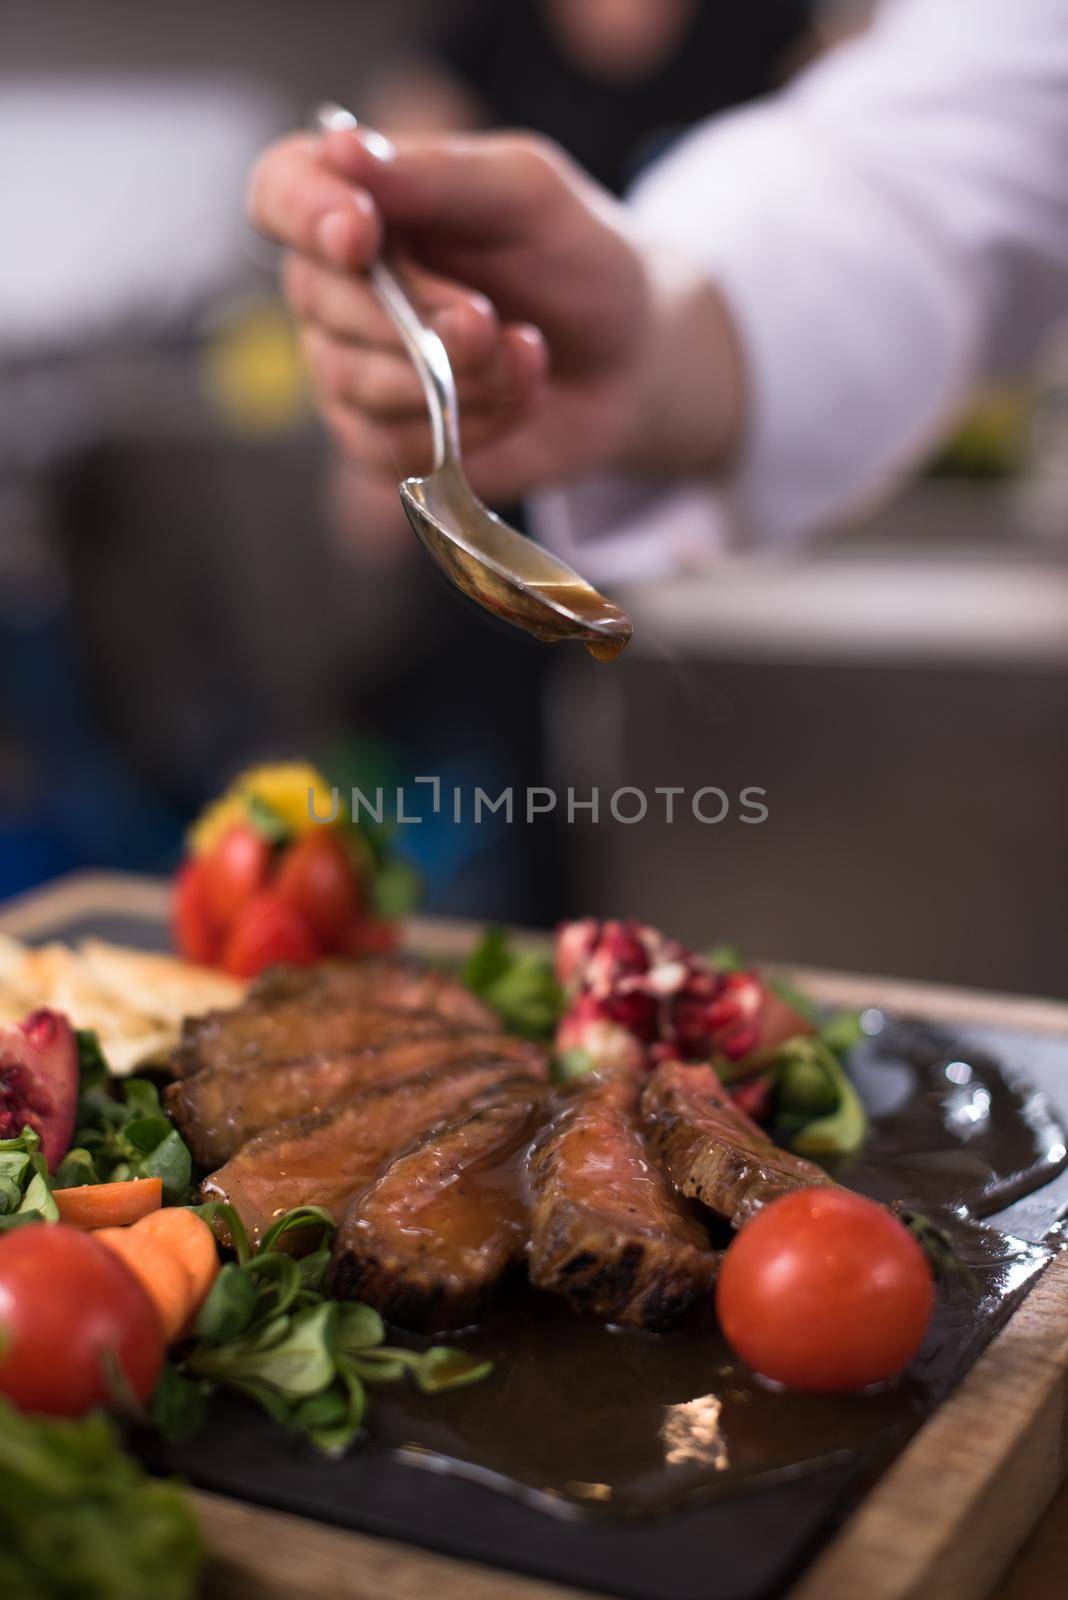 Chef hand finishing steak meat plate with Finally dish dressing and almost ready to serve at the table